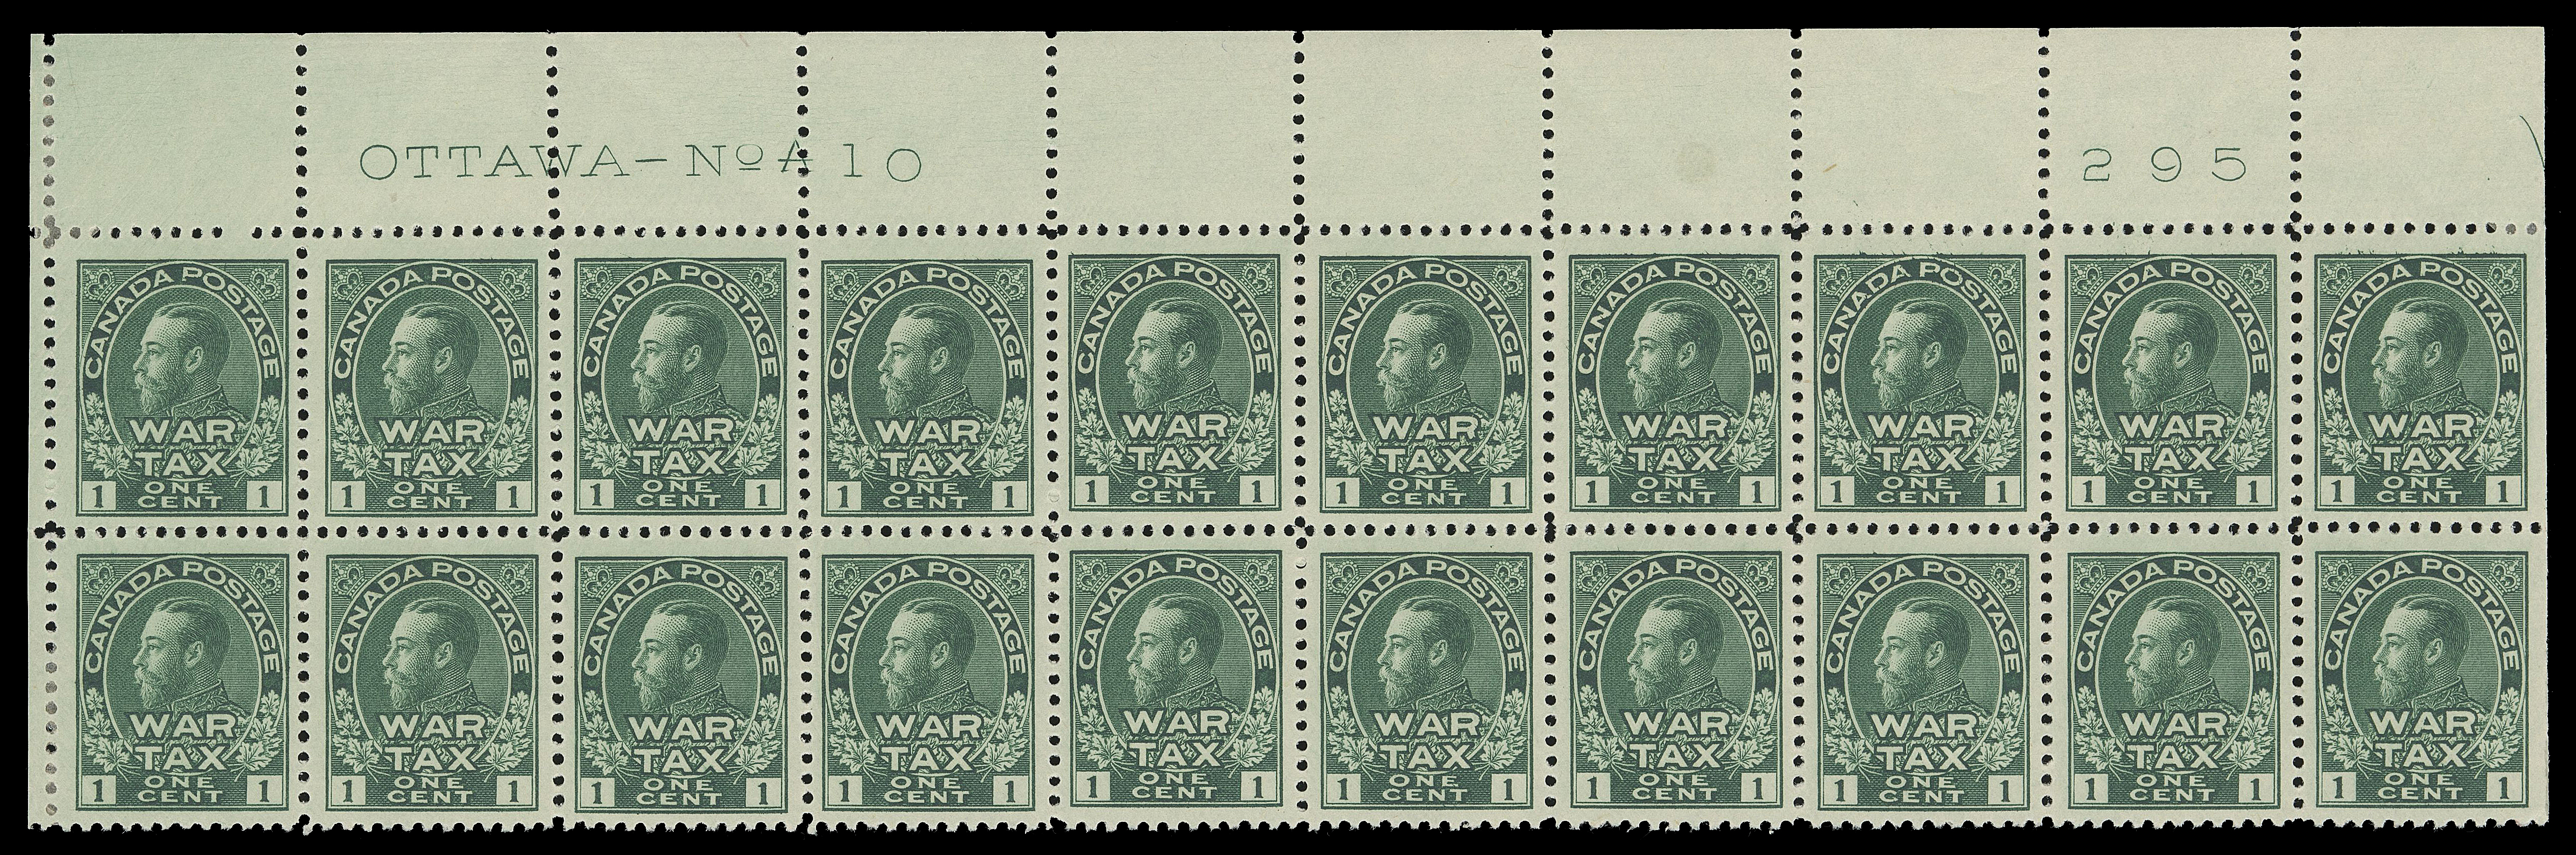 ADMIRAL STAMPS  MR1,Upper left Plate 10 block of twenty, printing order number "295" at right, hinged on end columns and position 4; inclusion spot in margin above position 7, fifteen stamps NH, VF and very scarce (Unitrade cat. $2,000)